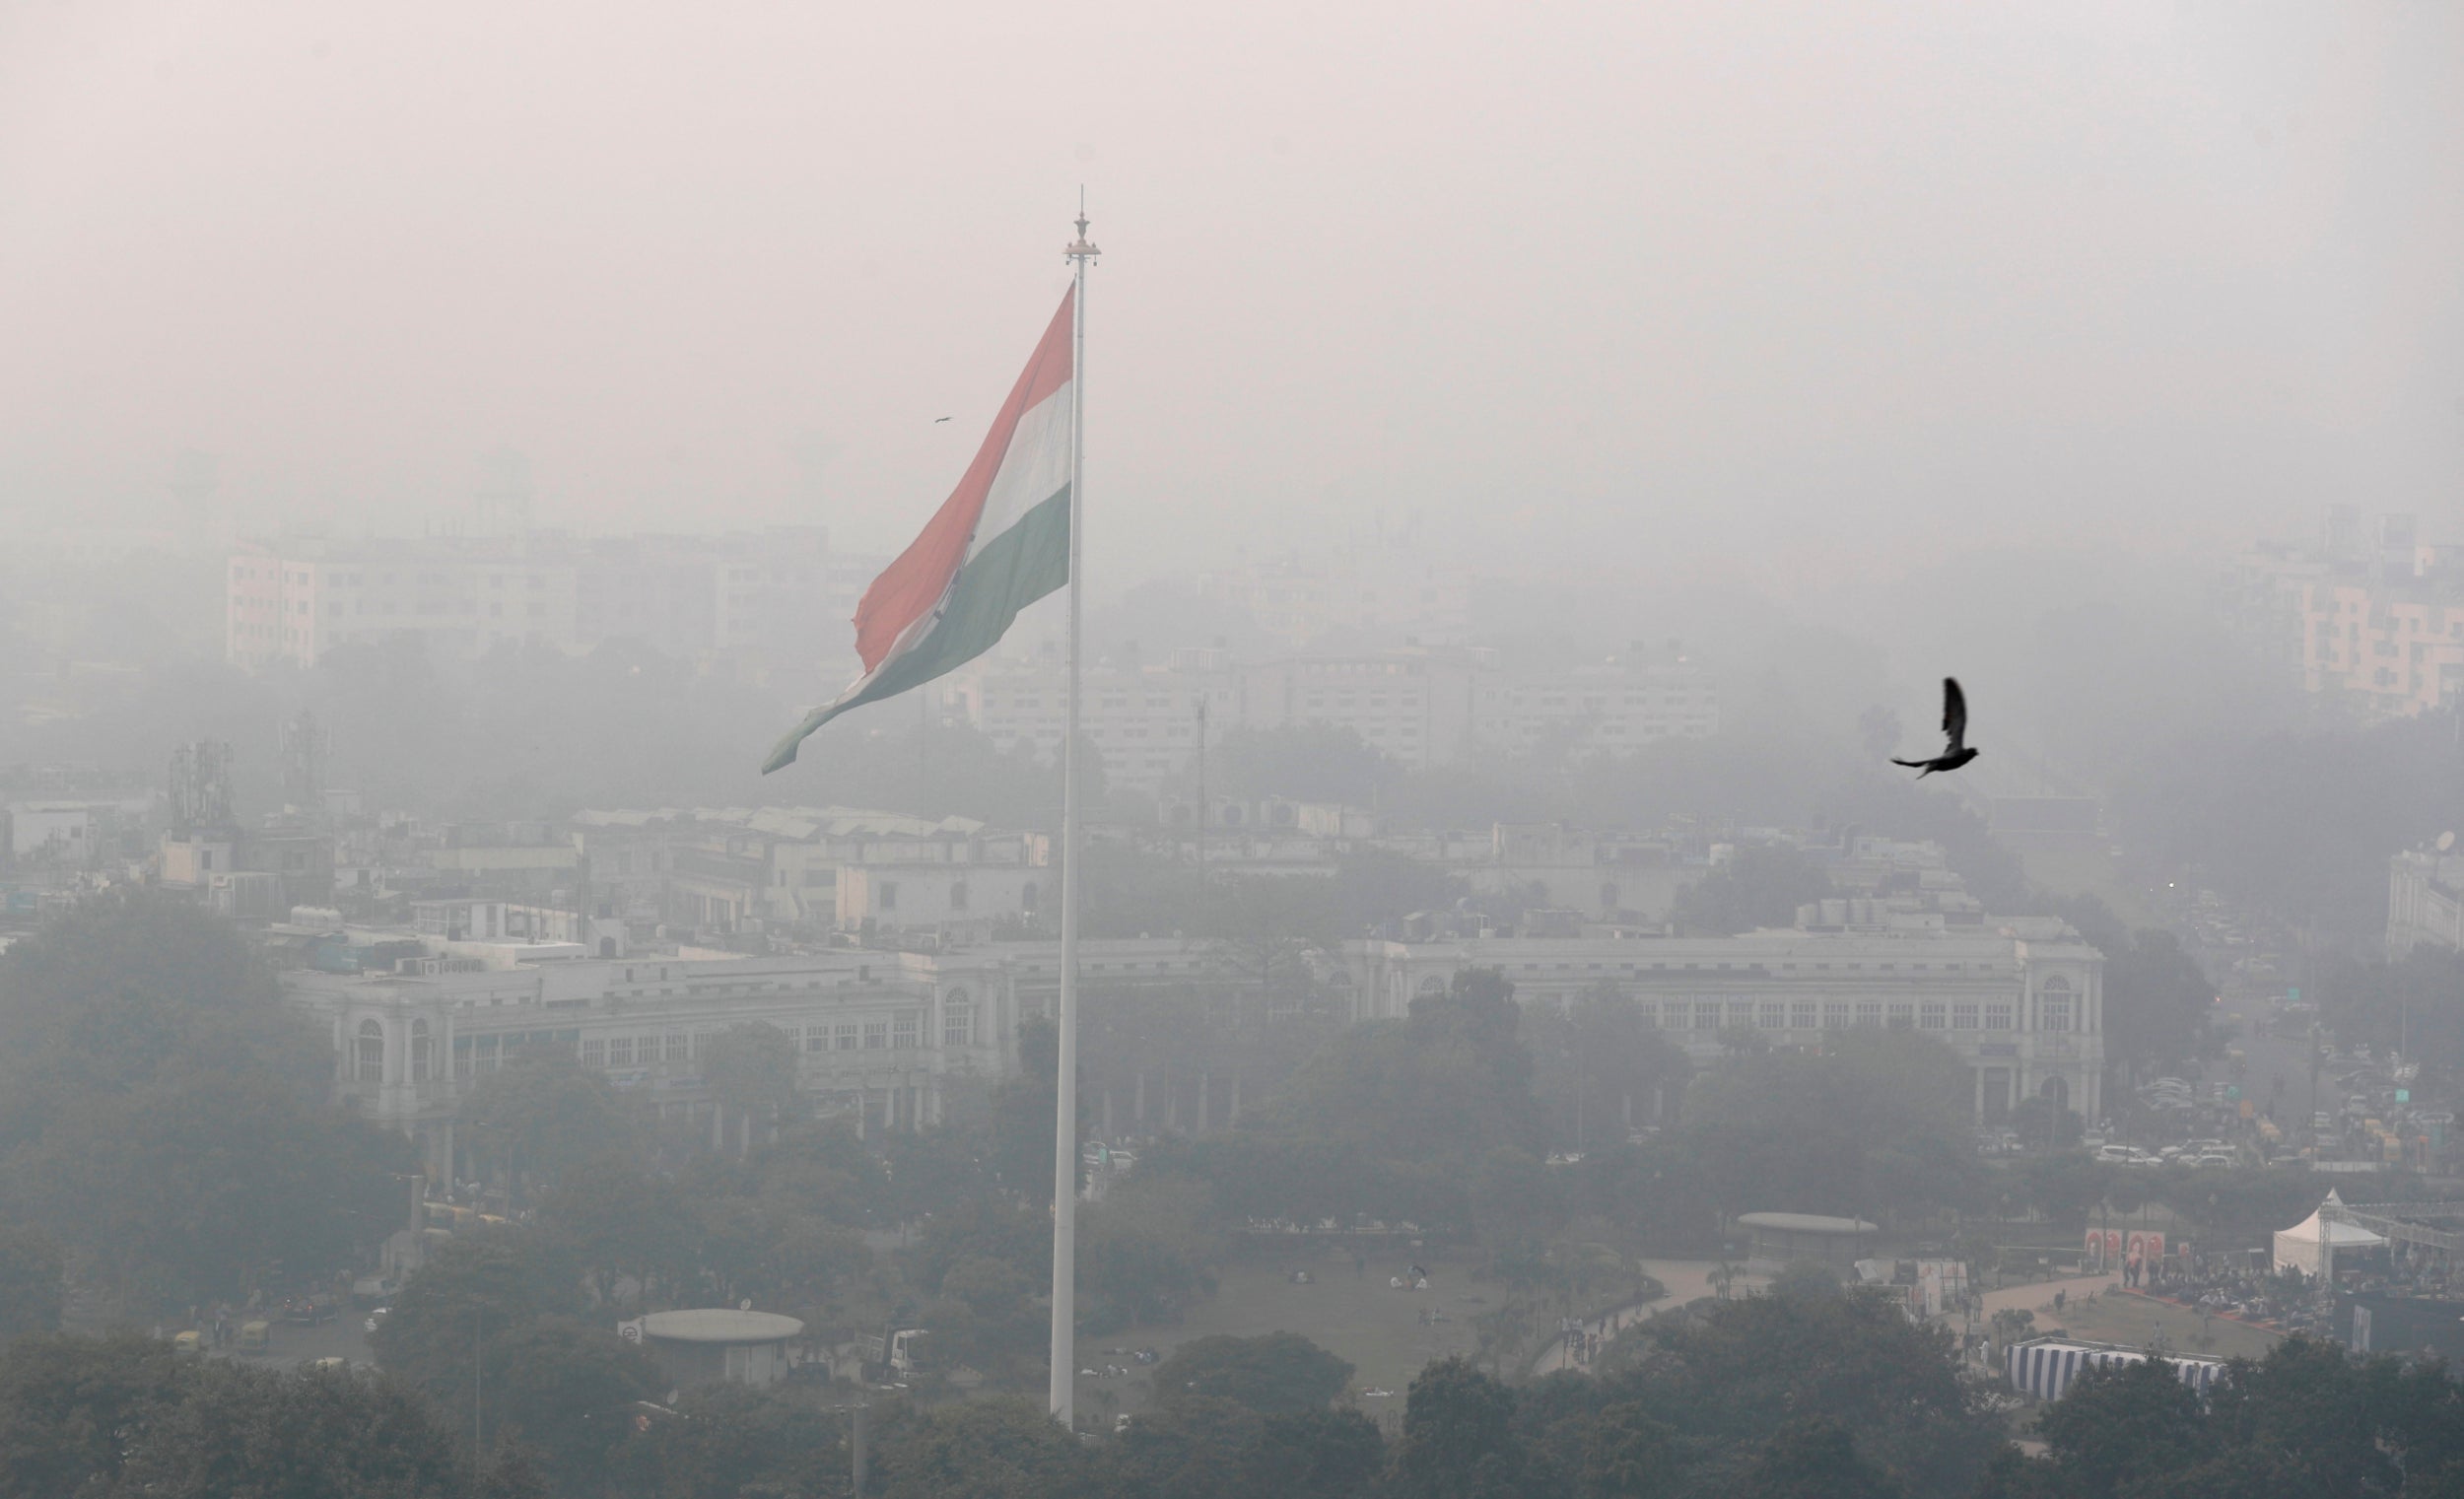 A bird flies past as Delhi’s skyline is seen enveloped in smog and dust on Friday